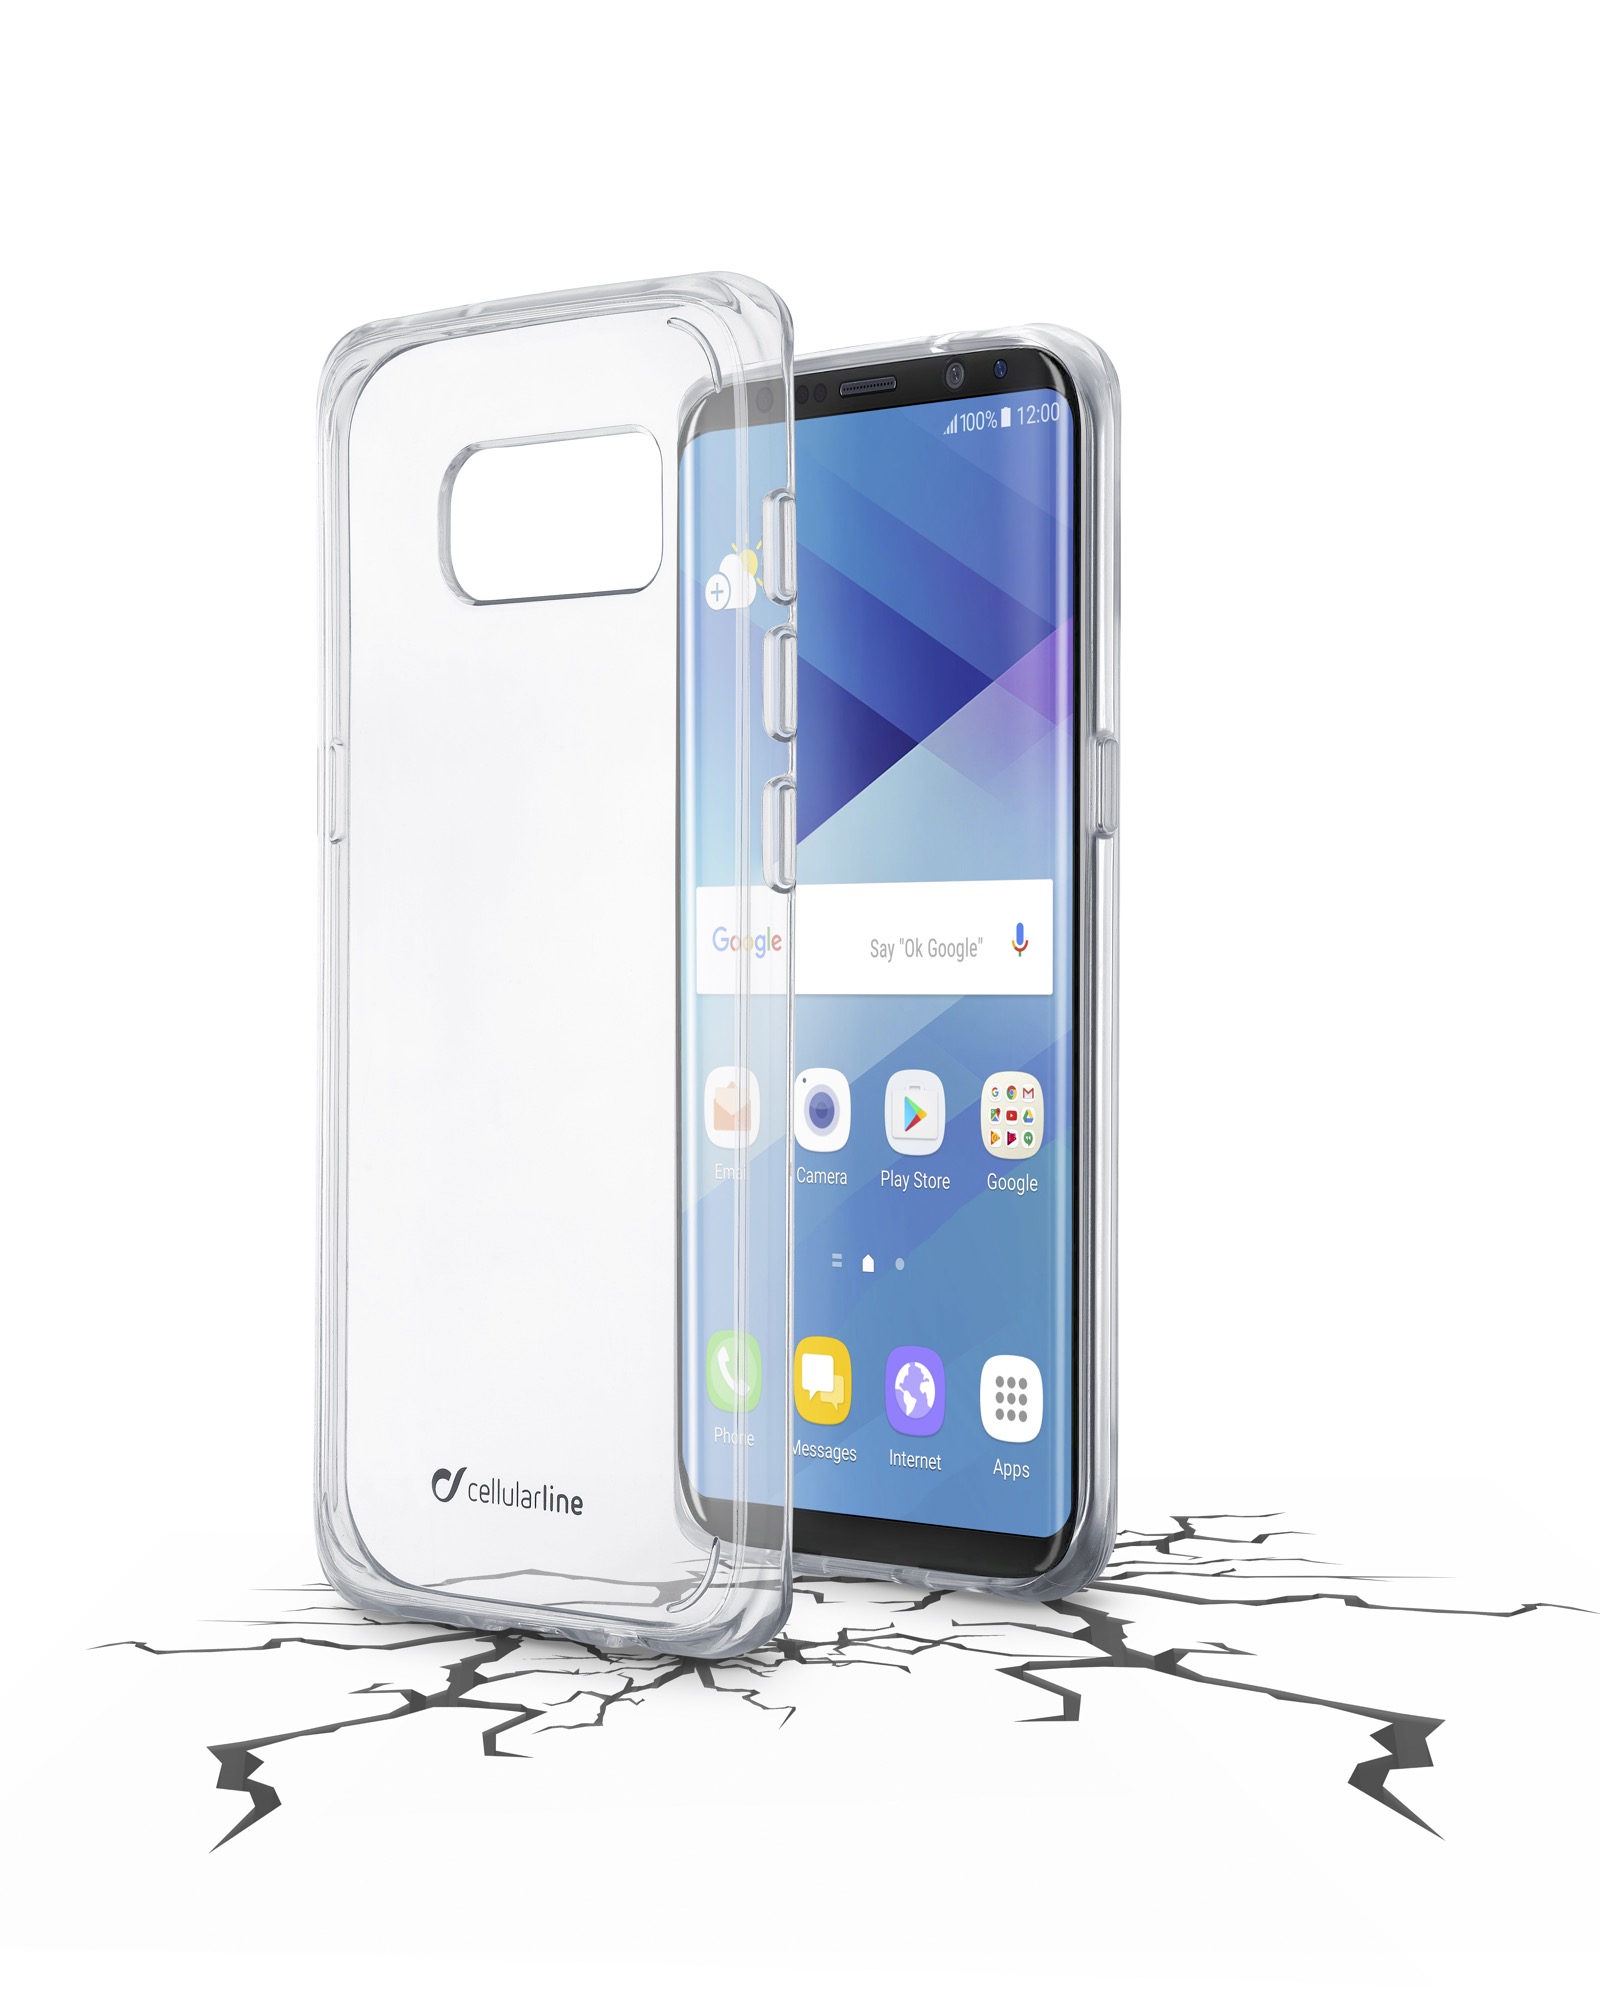 Samsung Galaxy S8, cover, clear duo, transparent